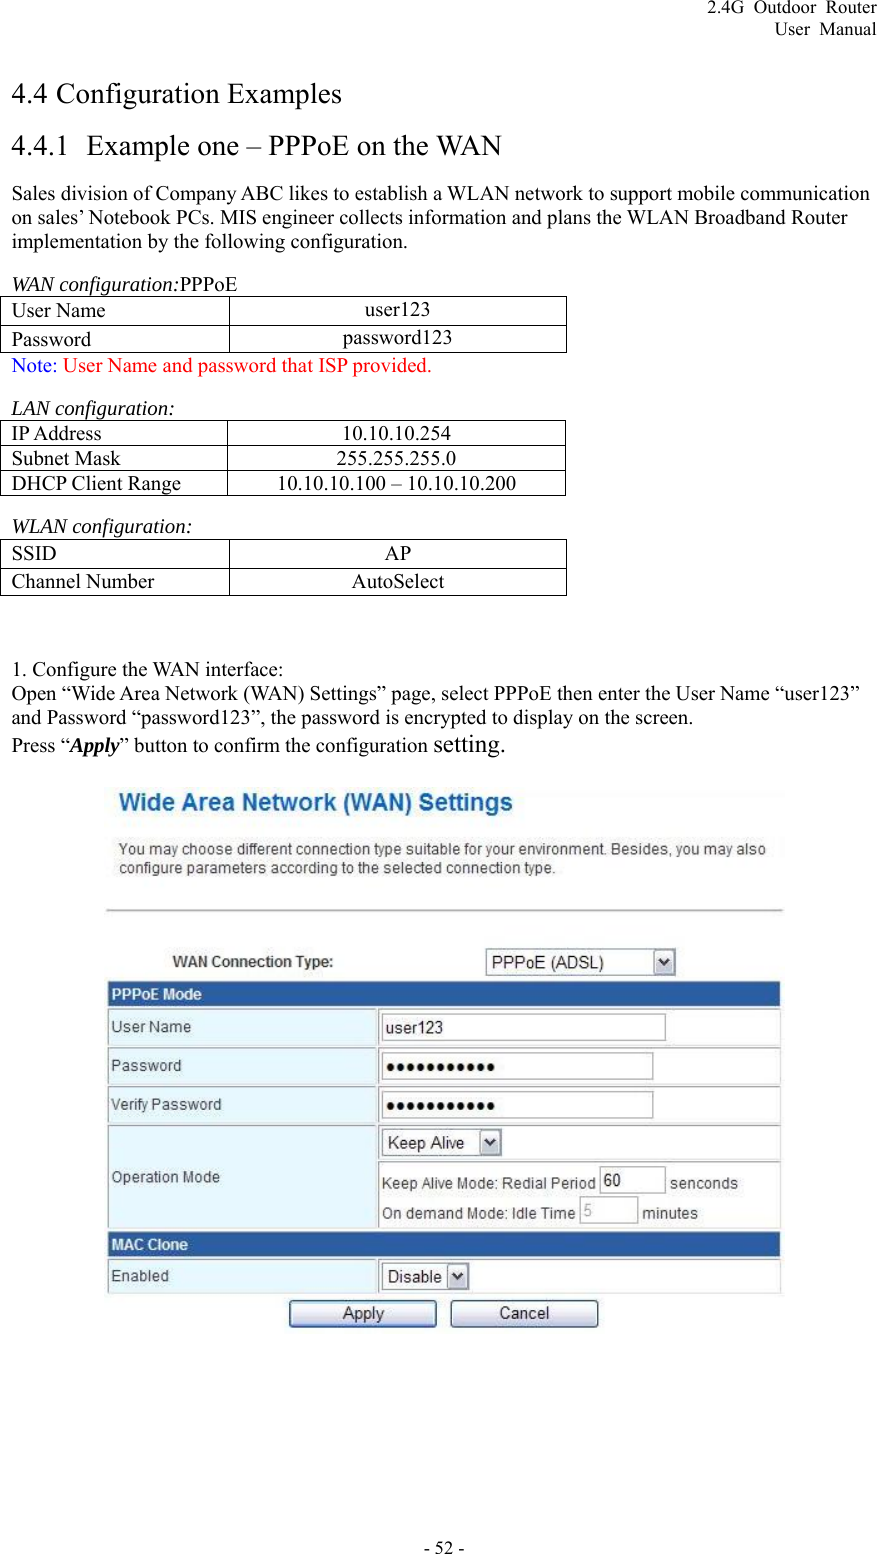 2.4G Outdoor Router User Manual 4.4  Configuration Examples 4.4.1 Example one – PPPoE on the WAN Sales division of Company ABC likes to establish a WLAN network to support mobile communication on sales’ Notebook PCs. MIS engineer collects information and plans the WLAN Broadband Router implementation by the following configuration. WAN configuration:PPPoE User Name    user123 Password   password123 Note: User Name and password that ISP provided. LAN configuration: IP Address 10.10.10.254 Subnet Mask 255.255.255.0 DHCP Client Range 10.10.10.100 – 10.10.10.200 WLAN configuration: SSID   AP Channel Number    AutoSelect  1. Configure the WAN interface:   Open “Wide Area Network (WAN) Settings” page, select PPPoE then enter the User Name “user123” and Password “password123”, the password is encrypted to display on the screen. Press “Apply” button to confirm the configuration setting.   - 52 - 